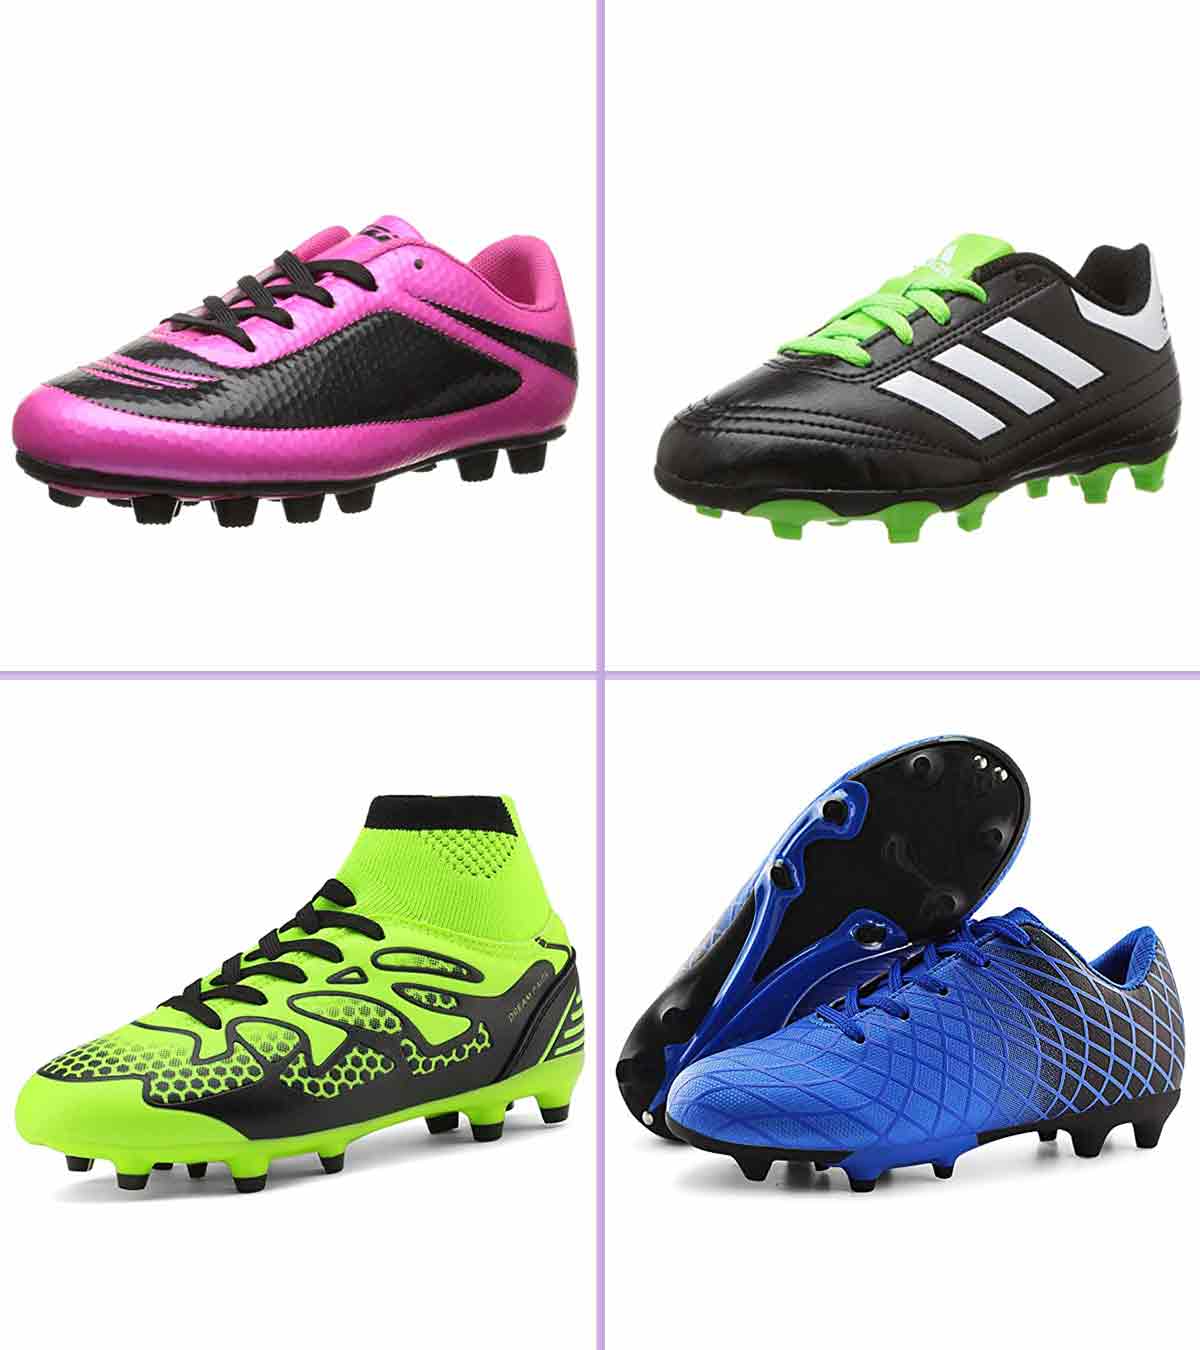 the best soccer cleats